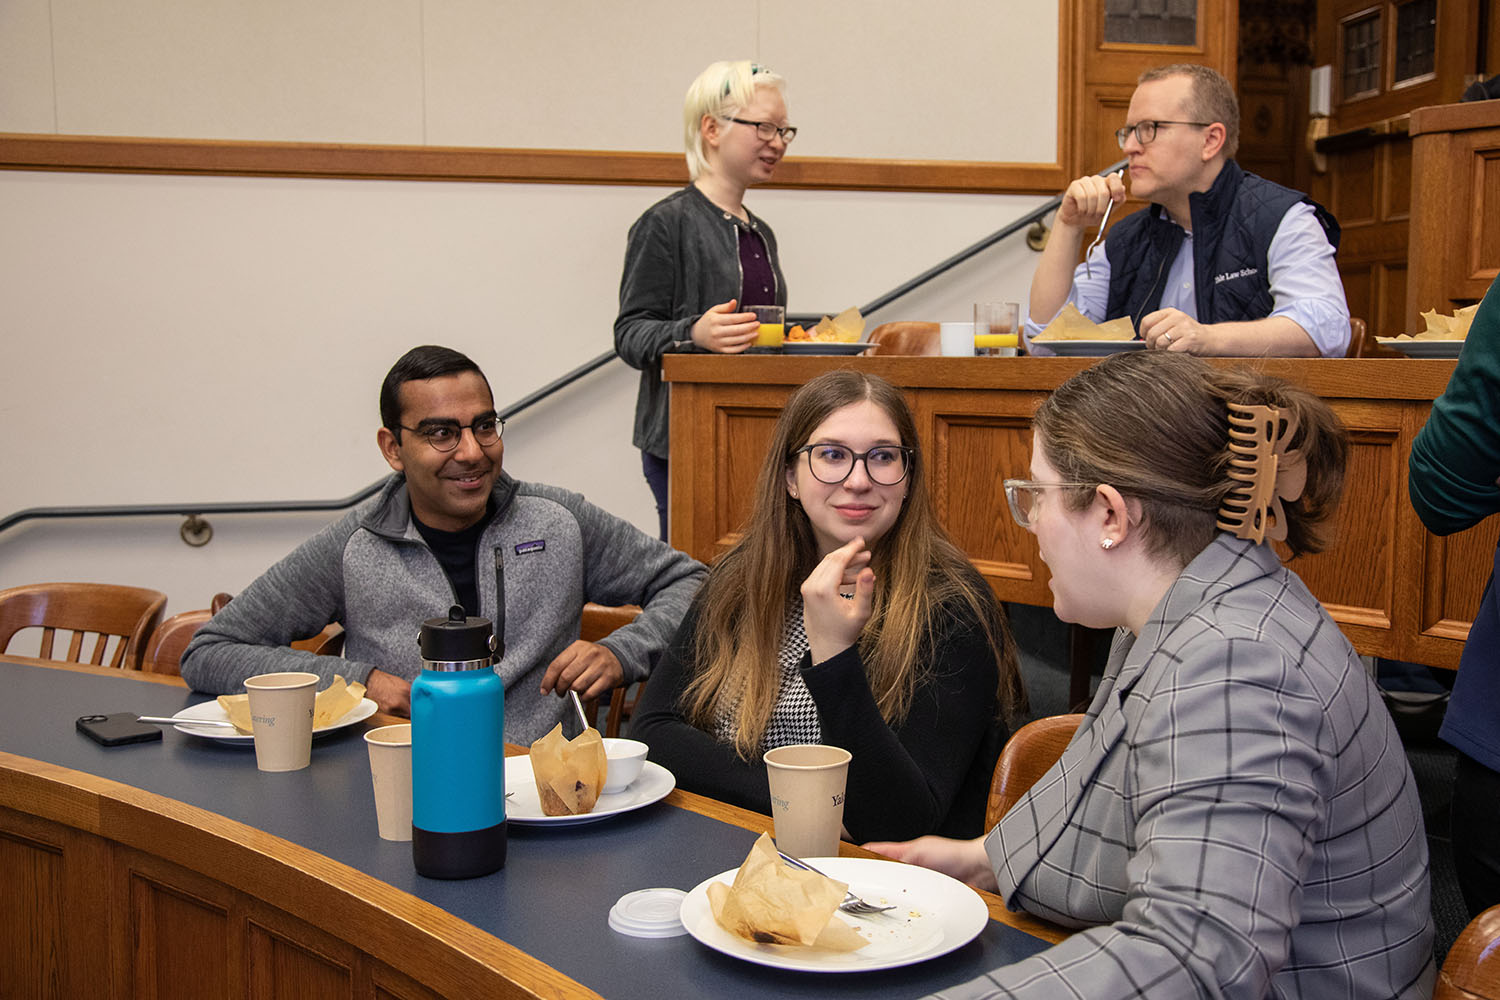 Students sitting at a table with coffee cups and plates of food as one talks.